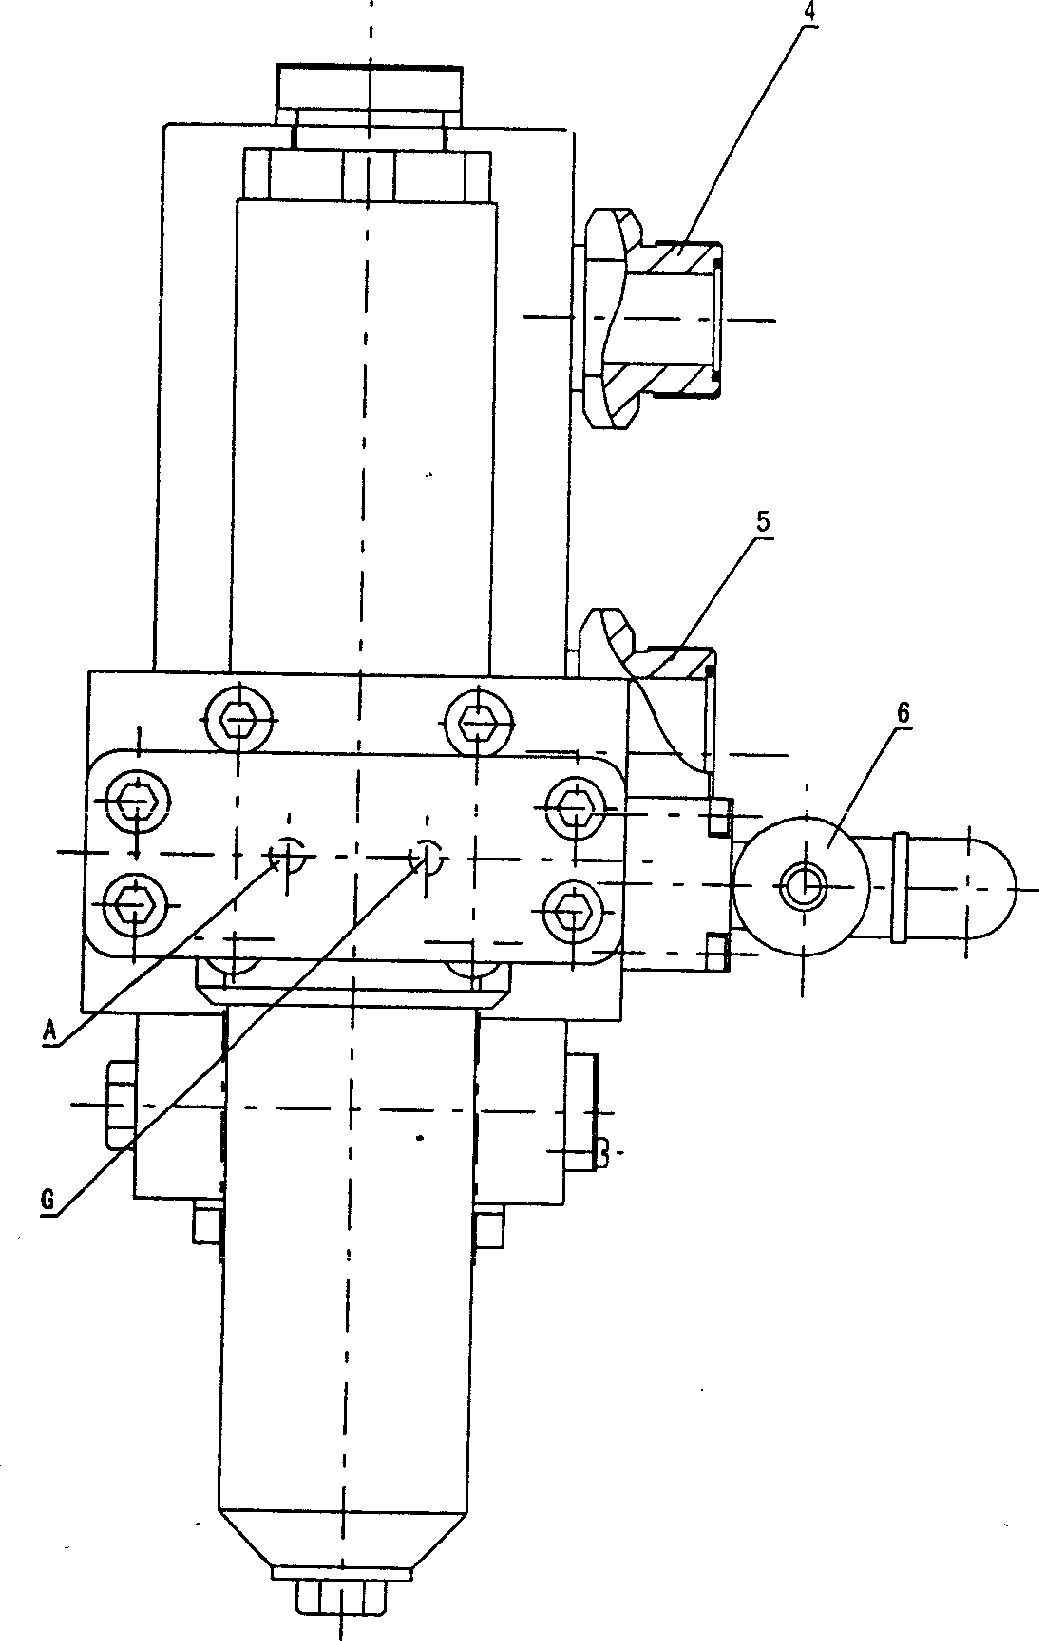 Electrohydraulic unloading valve with both hydraulic control mode and electrohydraulic control mode